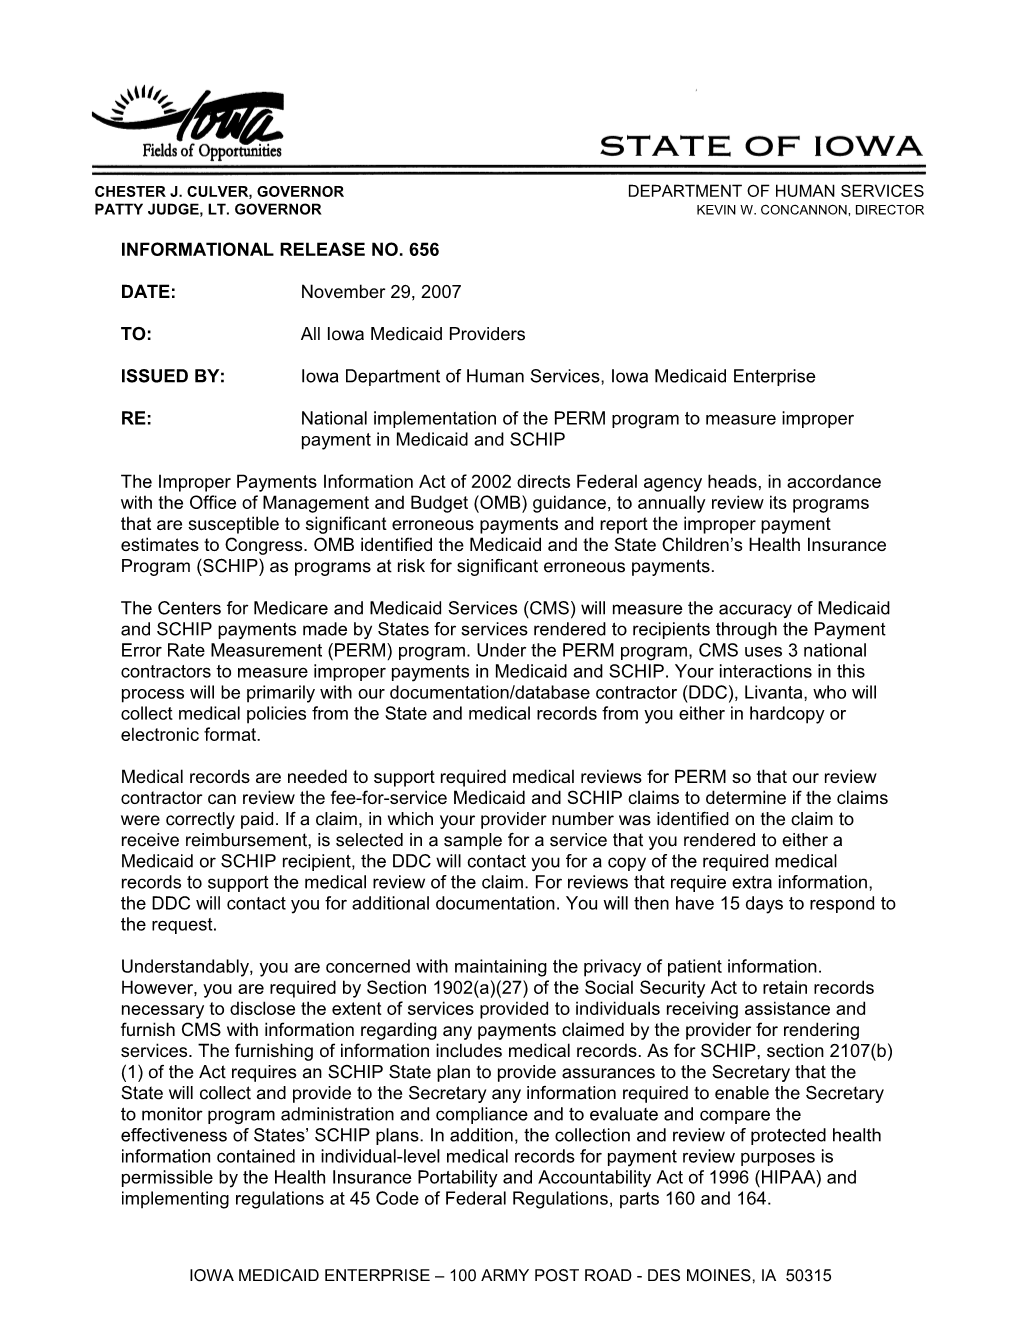 Department of Human Services Letterhead s12